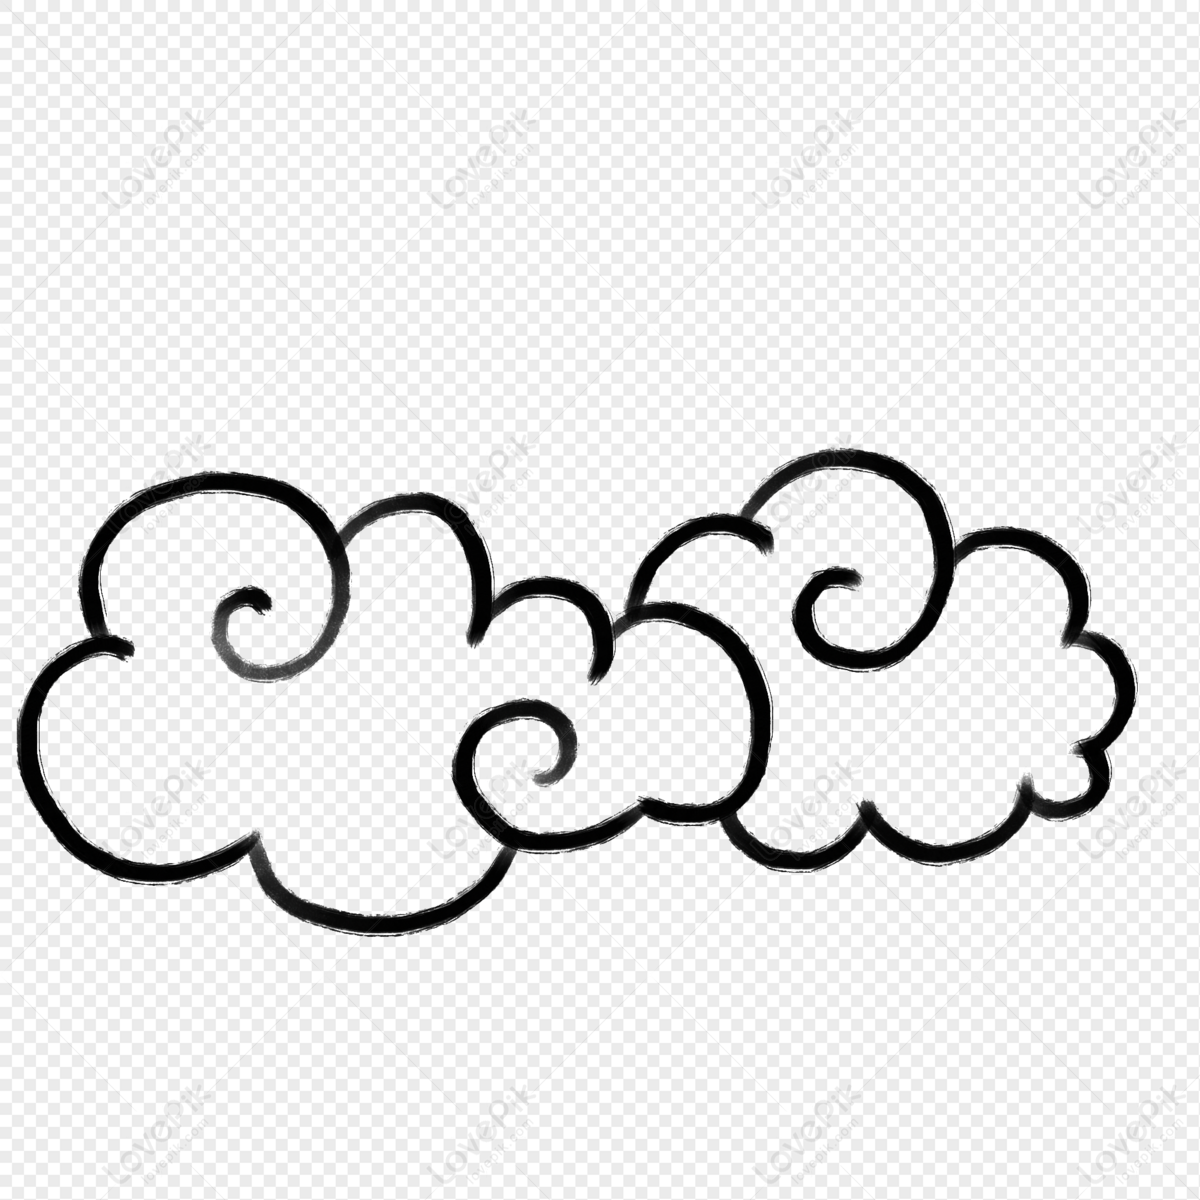 Hand Drawn Creative Cloud Illustration PNG Image Free Download And Clipart  Image For Free Download - Lovepik